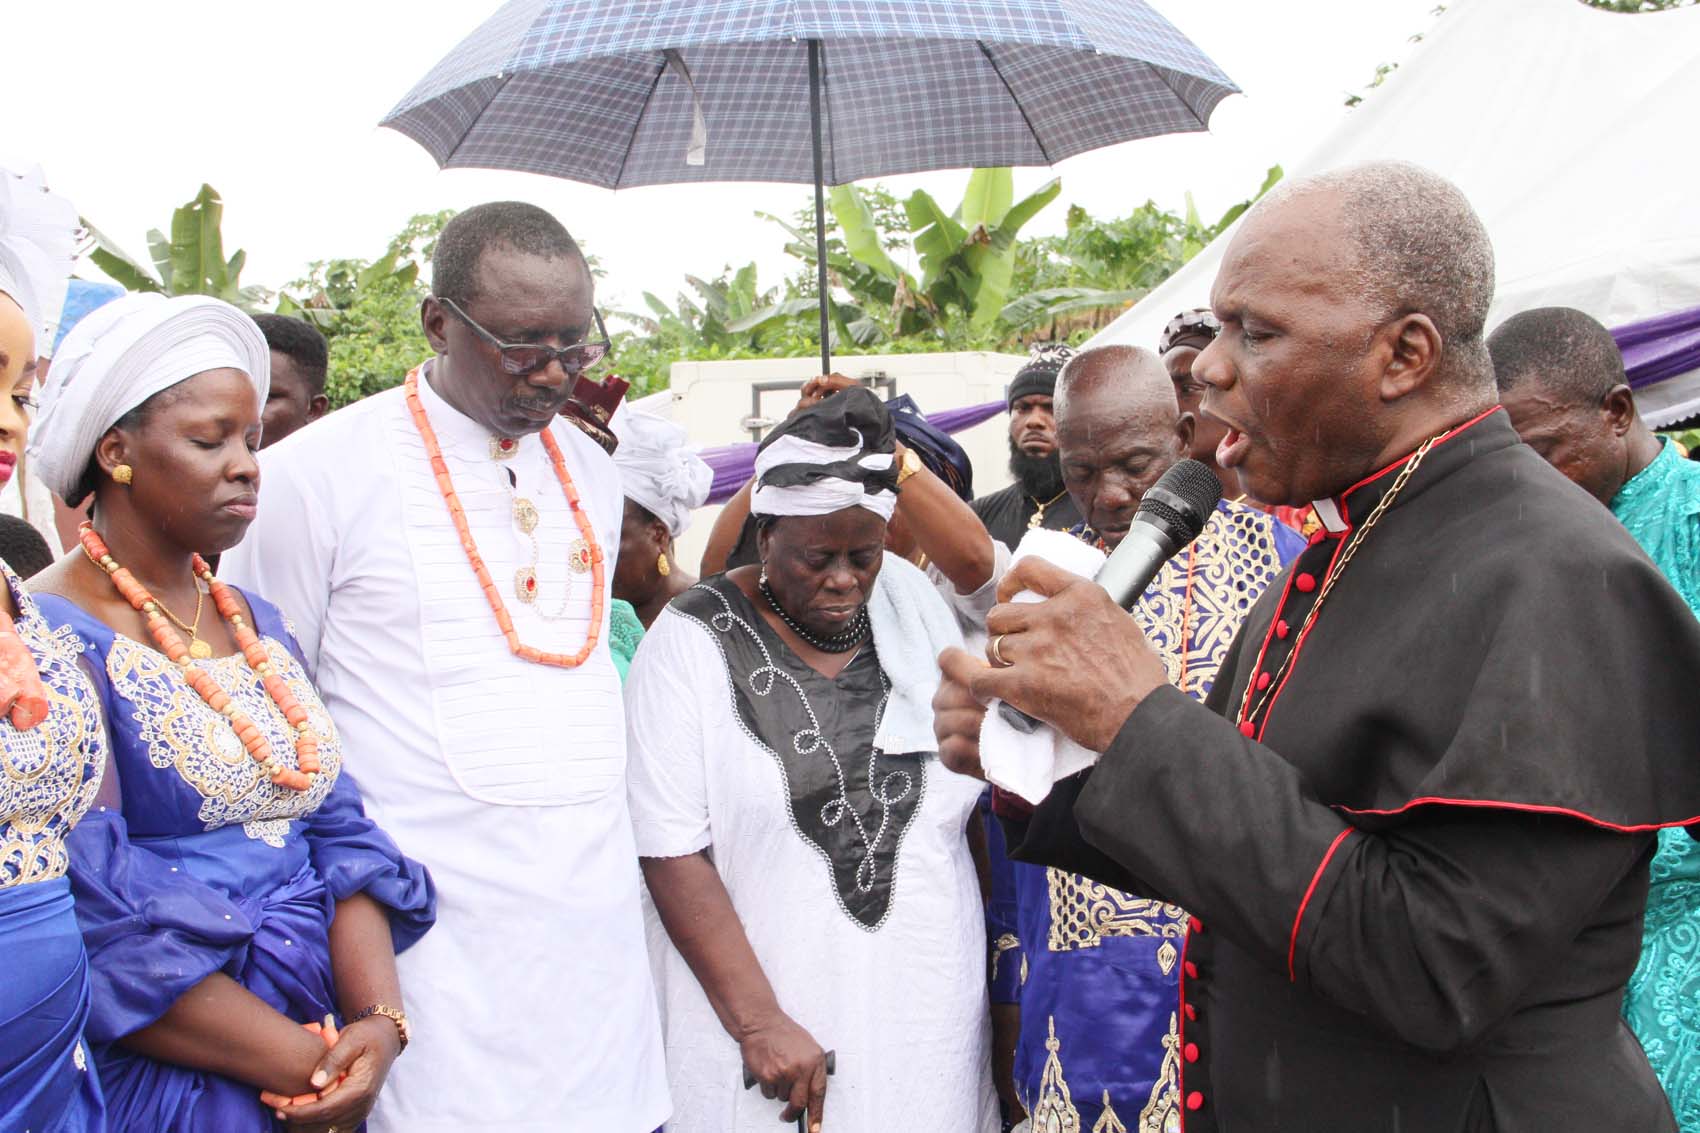  L-R,  Daughter of Late Bishop Diamond Emuobor Mrs Efe Ebelo, Her Husband Mr Goodluck  Ebelo, Wife Mrs Elizabeth Emuobor and Former, Executive Secretary, Delta State Pilgrims Welfare Board Bishop Orho Iteheri during the Final Burial of the Late Bishop Diamond Emuobor in Ugborhen, Sapele Delta State at the weekend